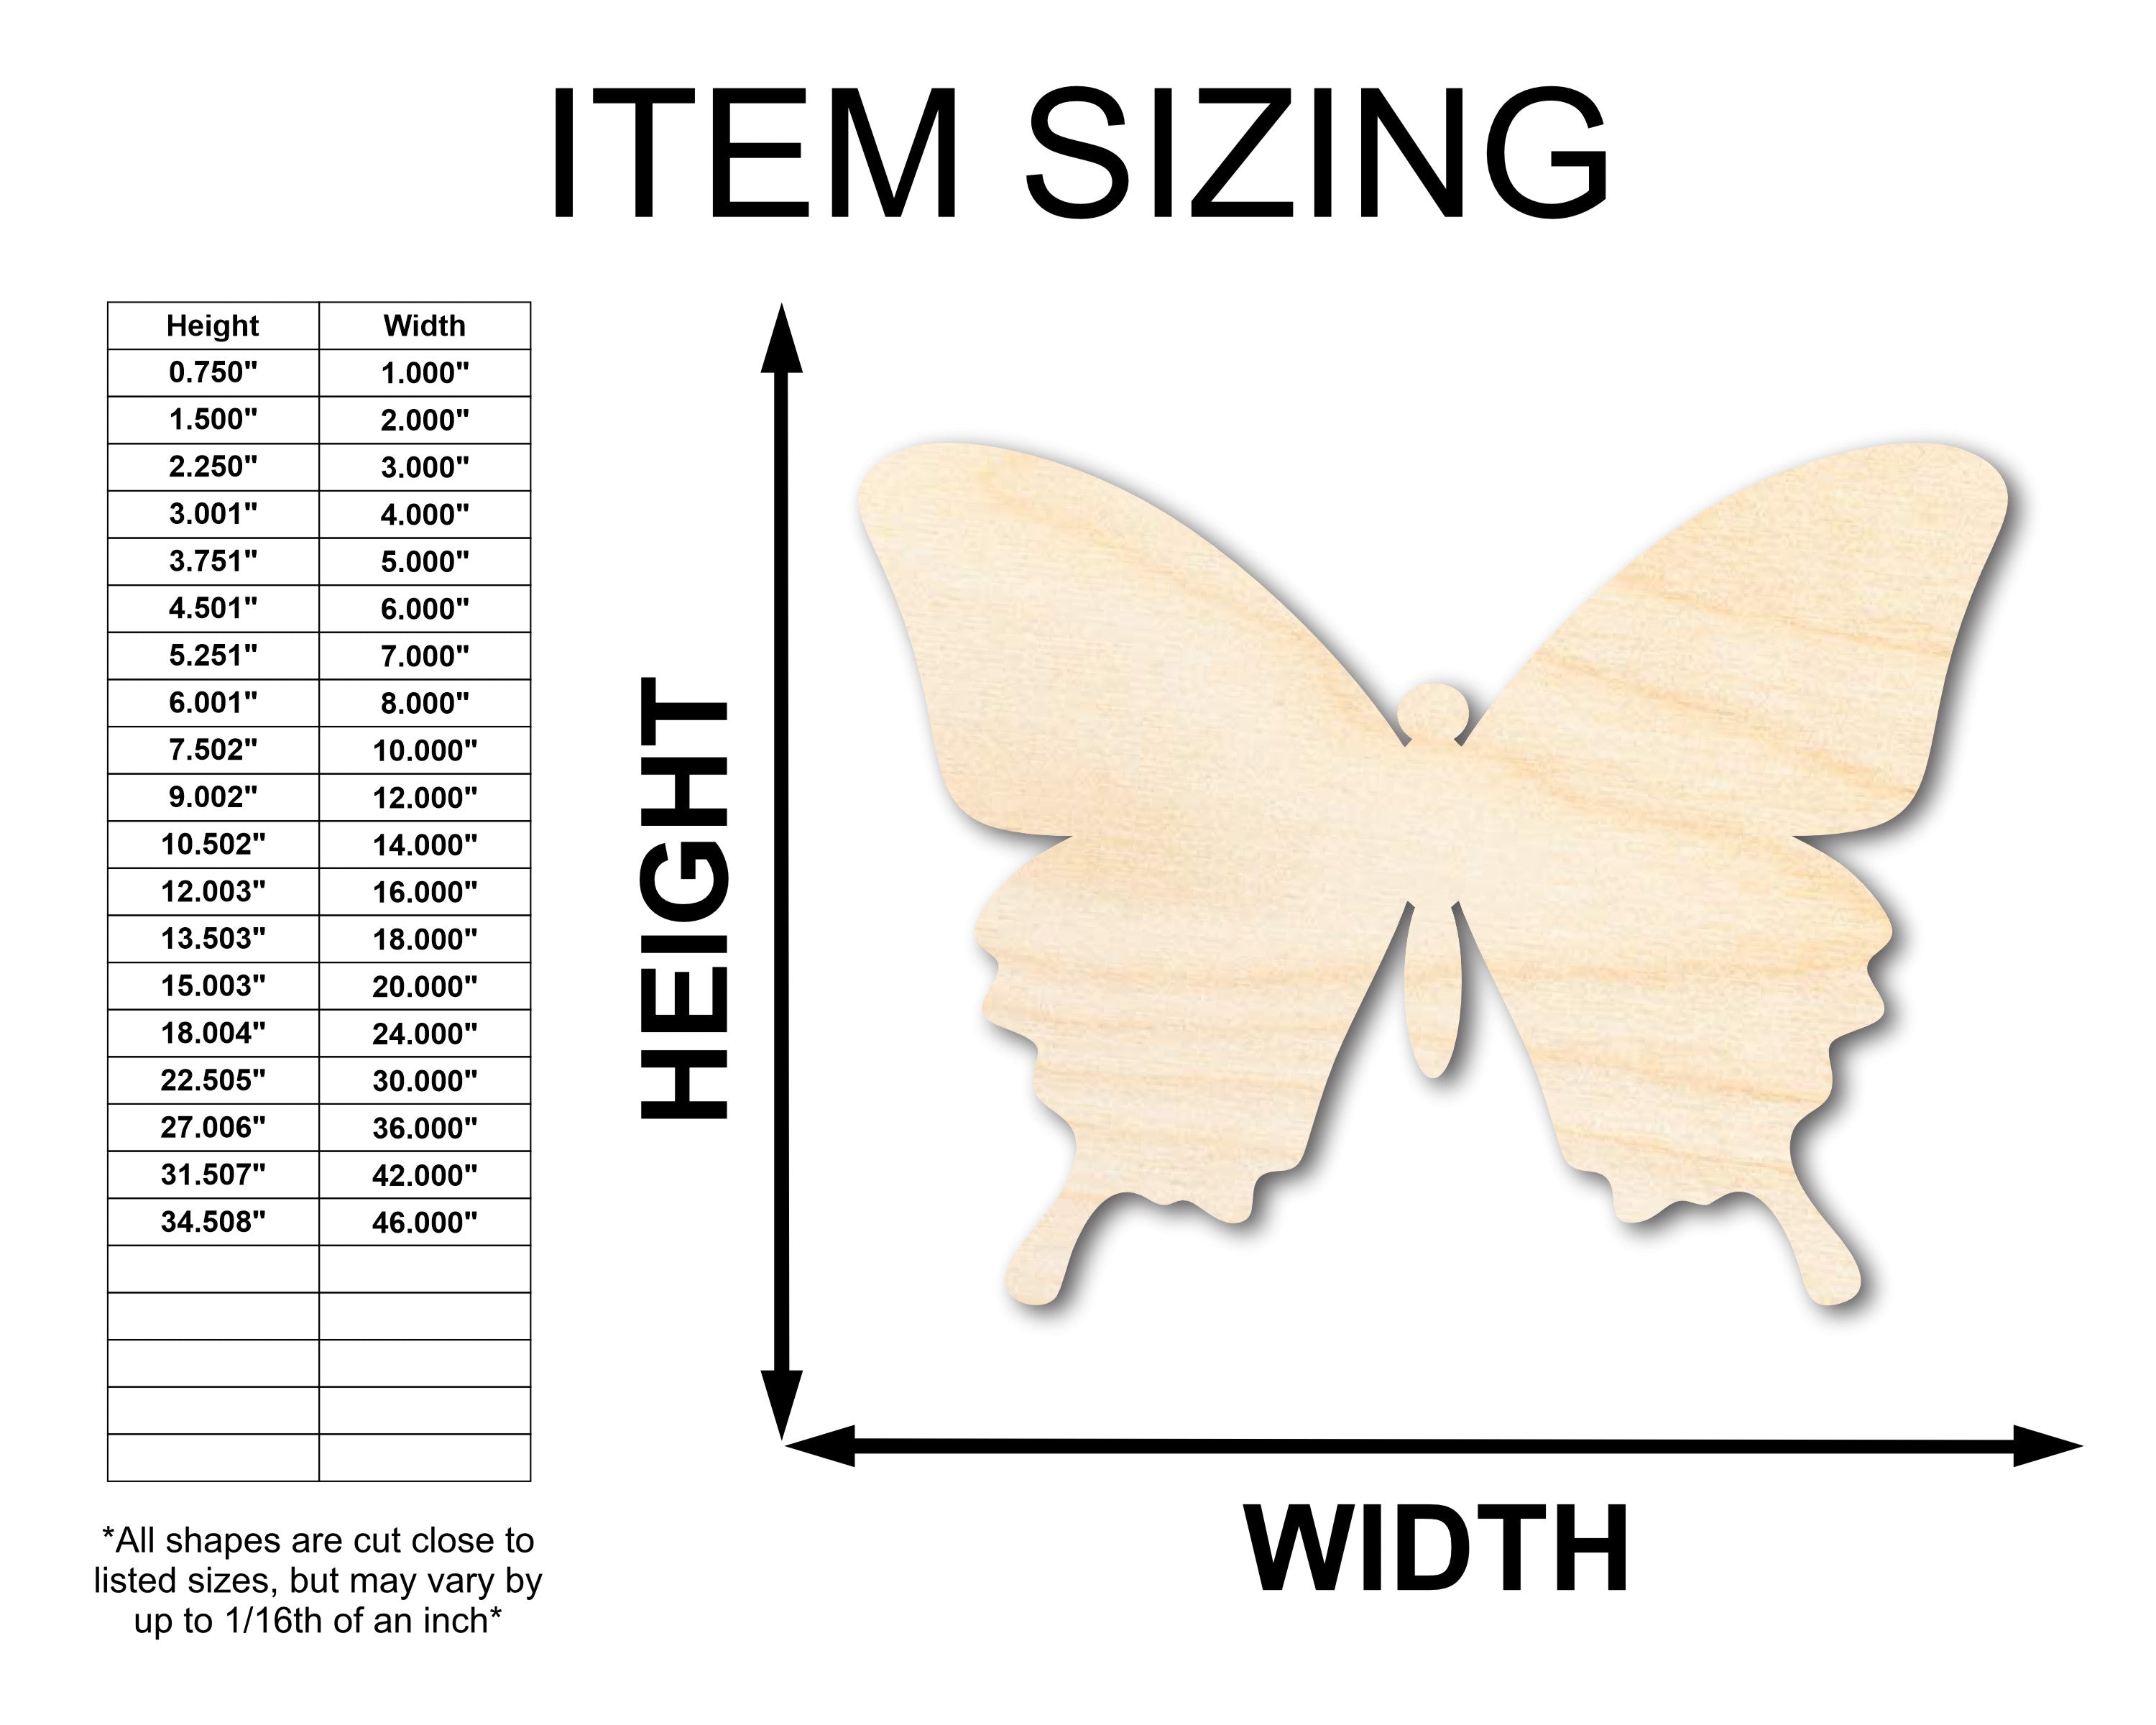 Unfinished Wood Butterfly | Insect | Animal | Wildlife | Craft Cutout | up to 24